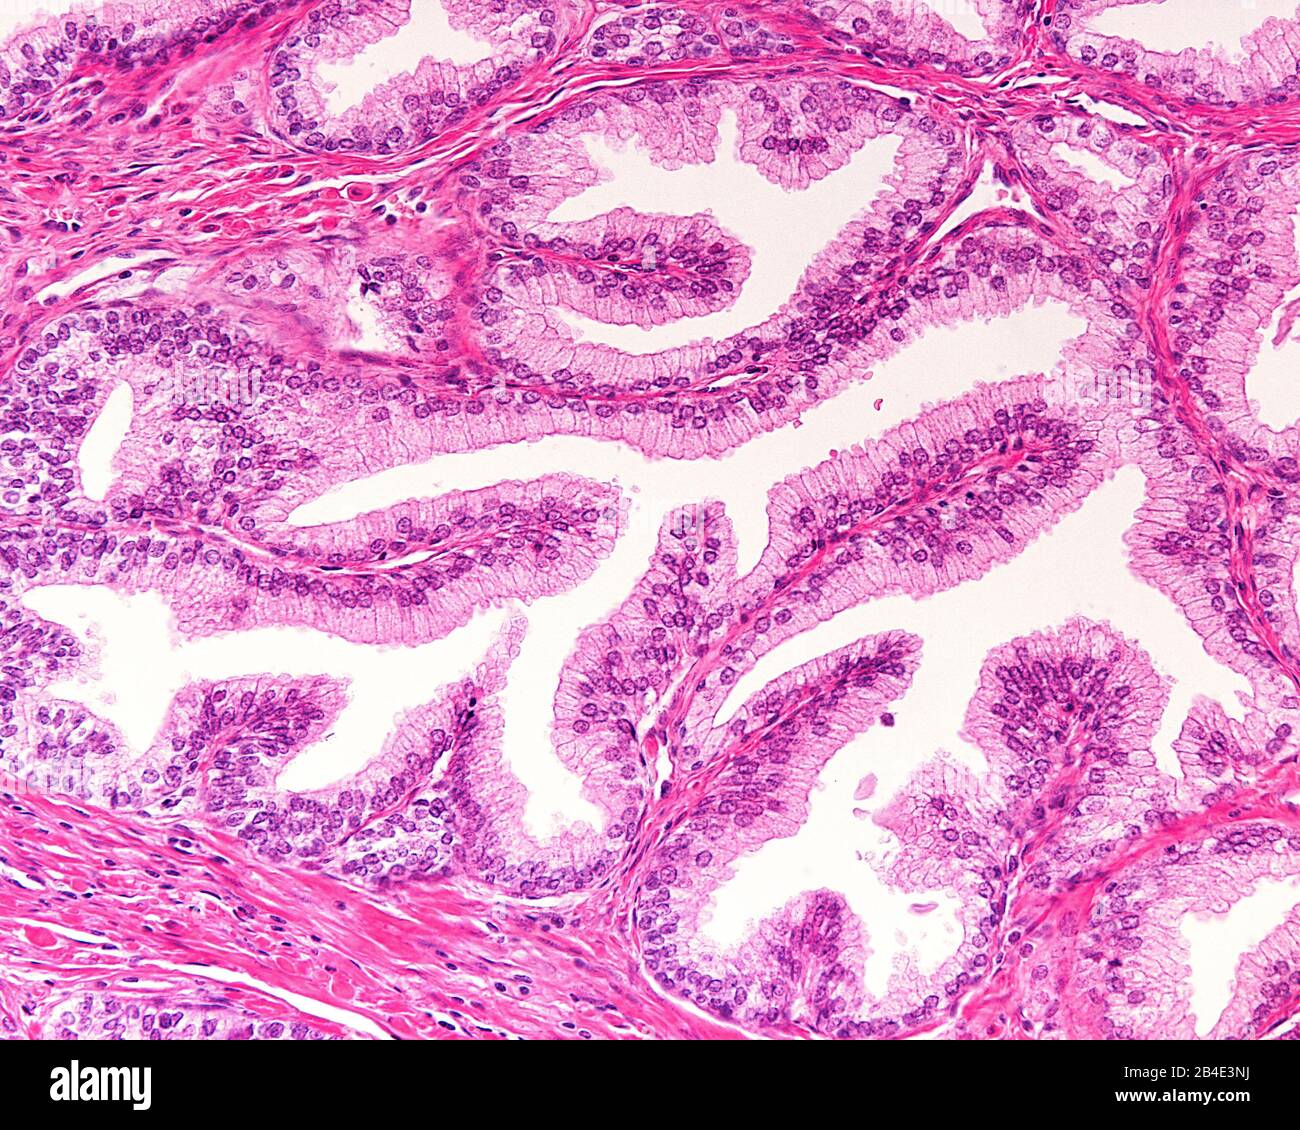 High magnification of a human prostatic gland. A simple columnar epithelium surrounds a very irregular lumen. Hematoxylin & eosin stain. Stock Photo